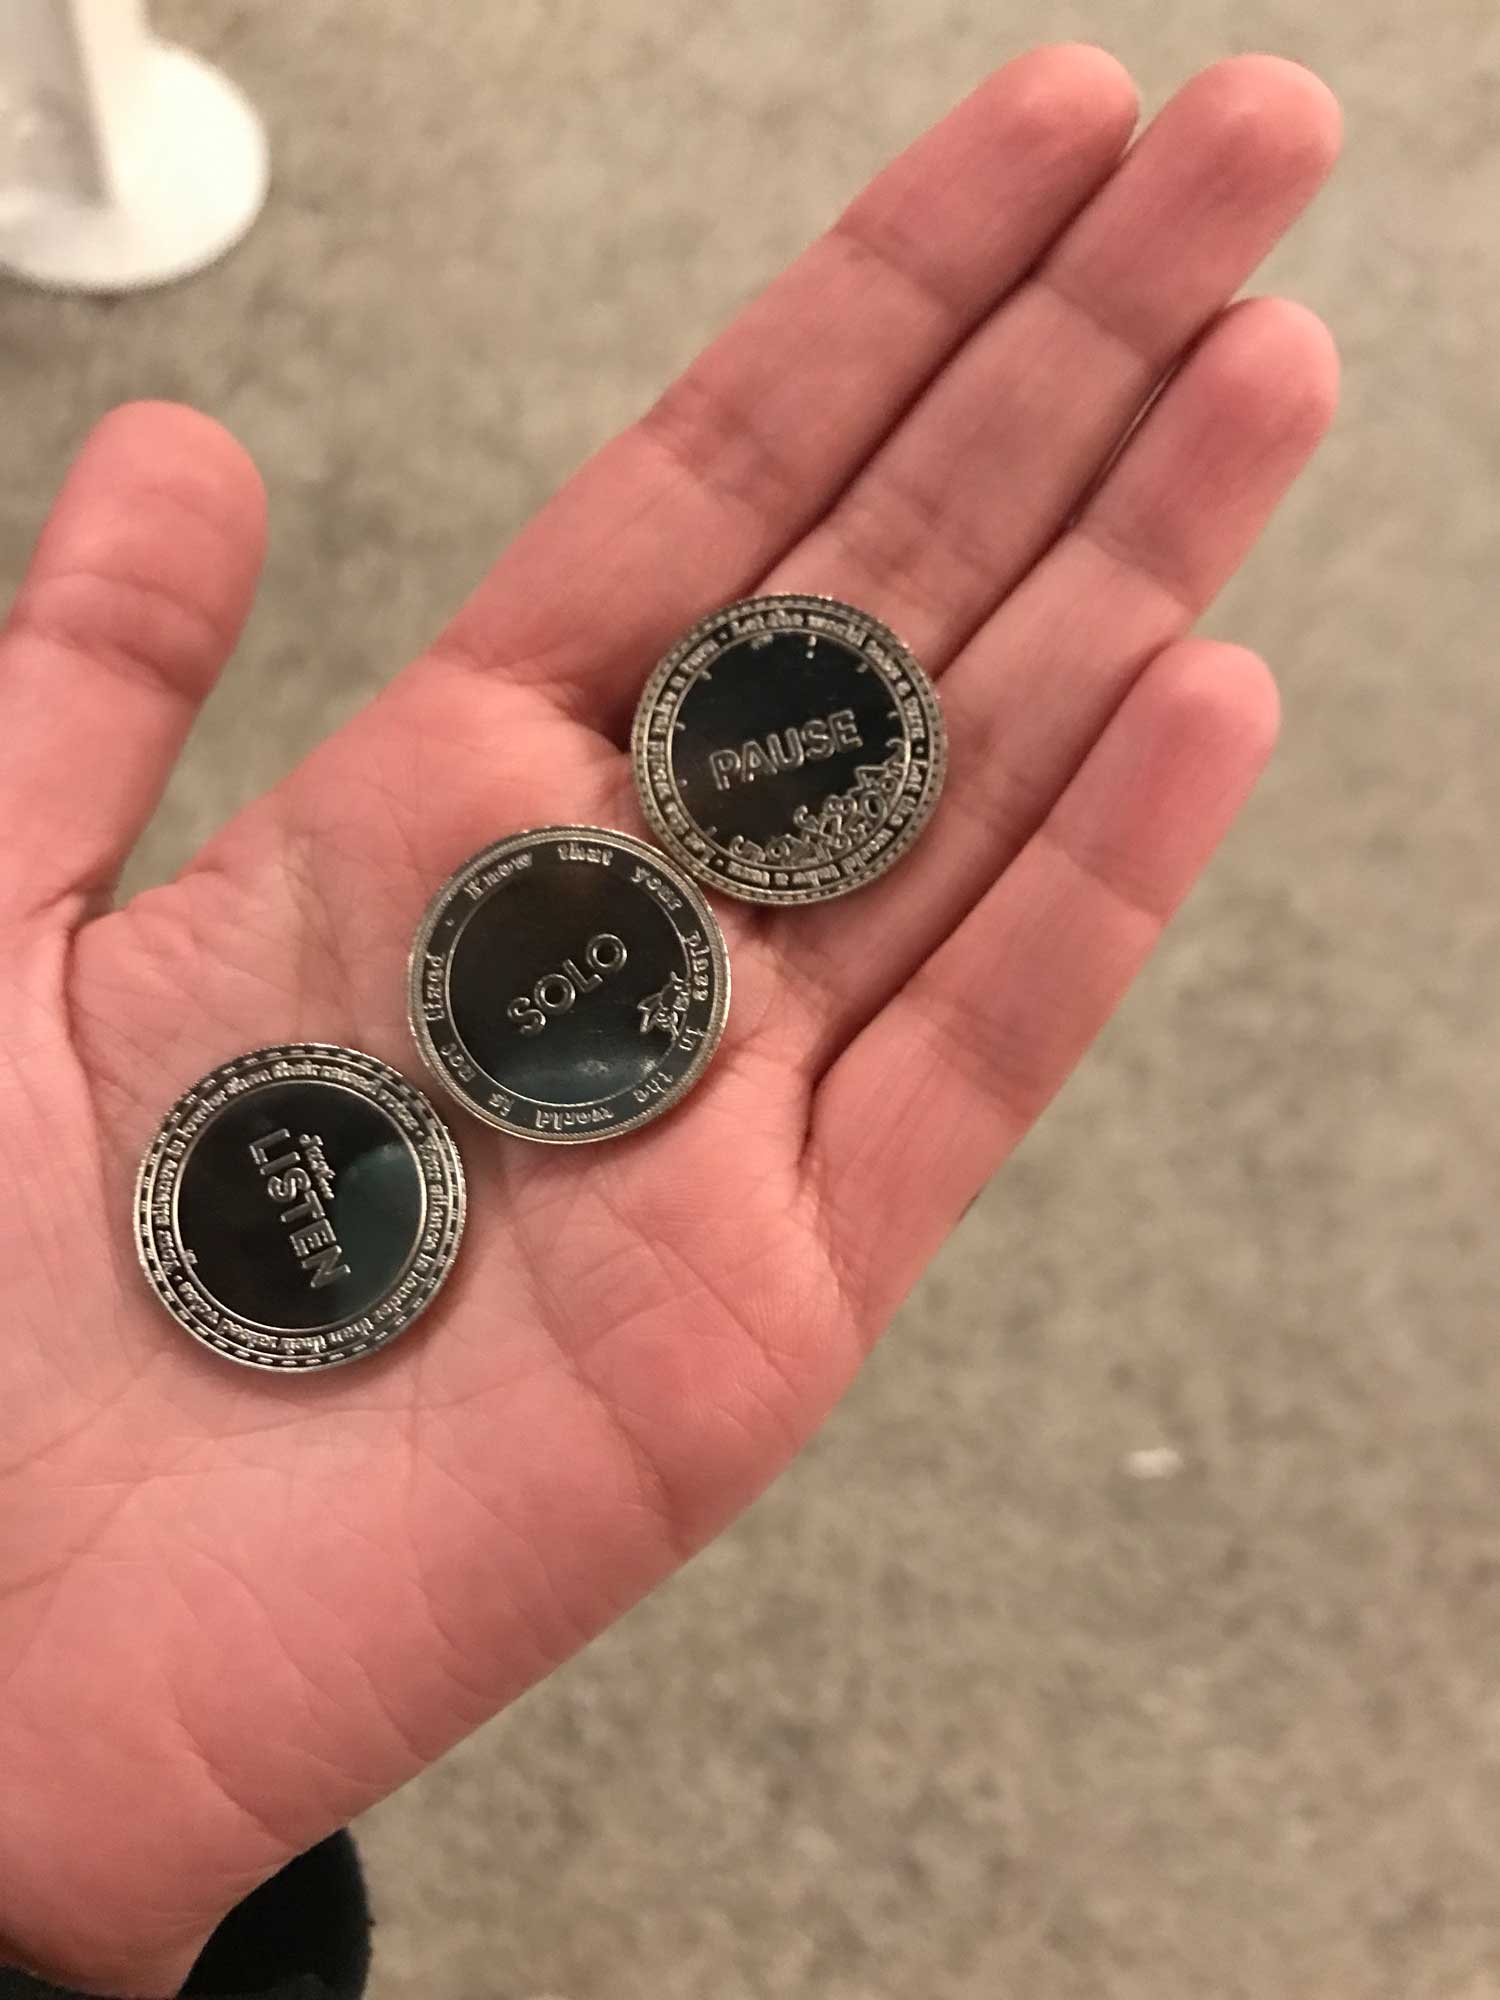 The full set of coins